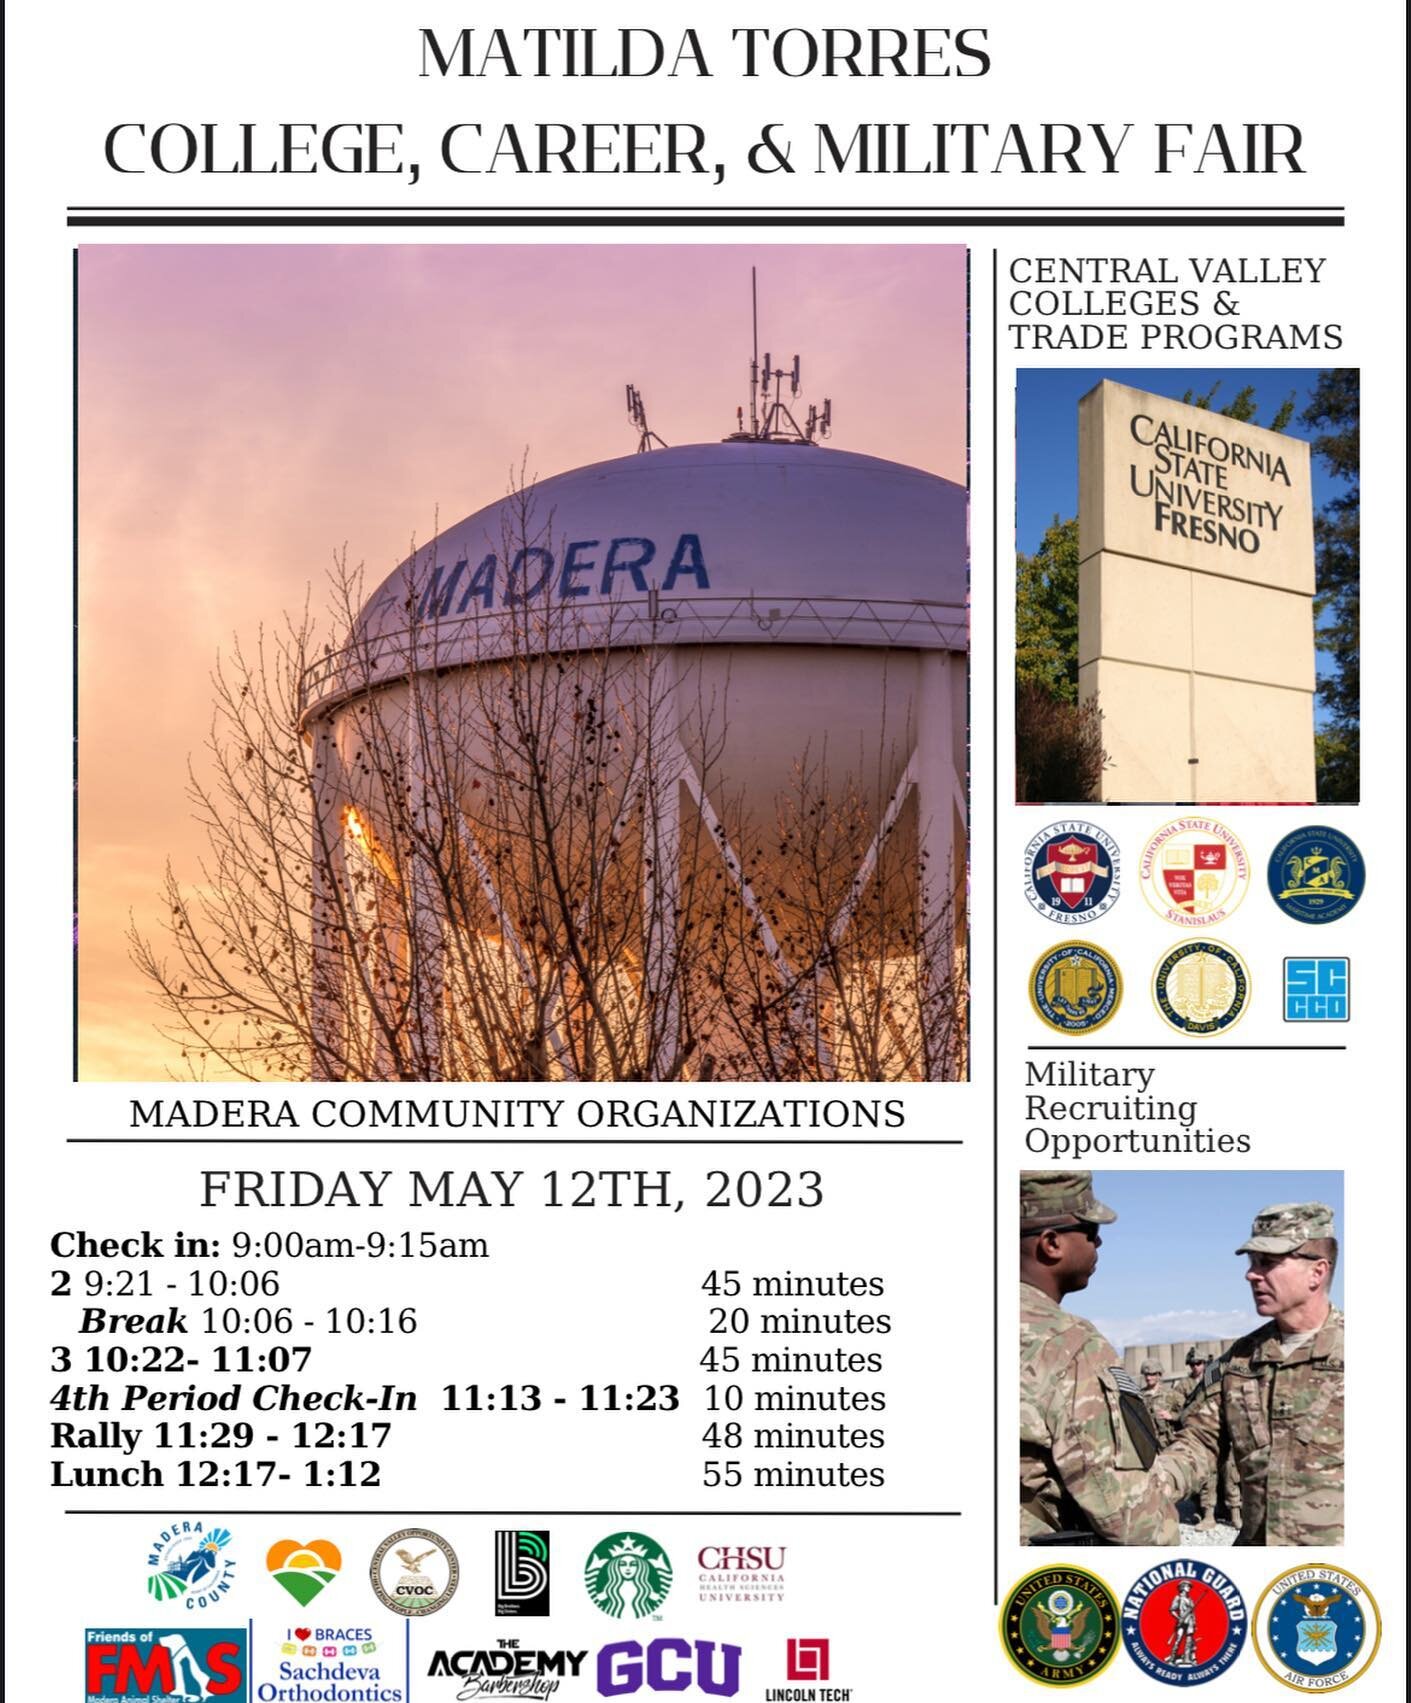 We will be at the Matilda Torres Career event this Friday! Any High School students interested in becoming a barber, this is your chance to ask any questions you may have!